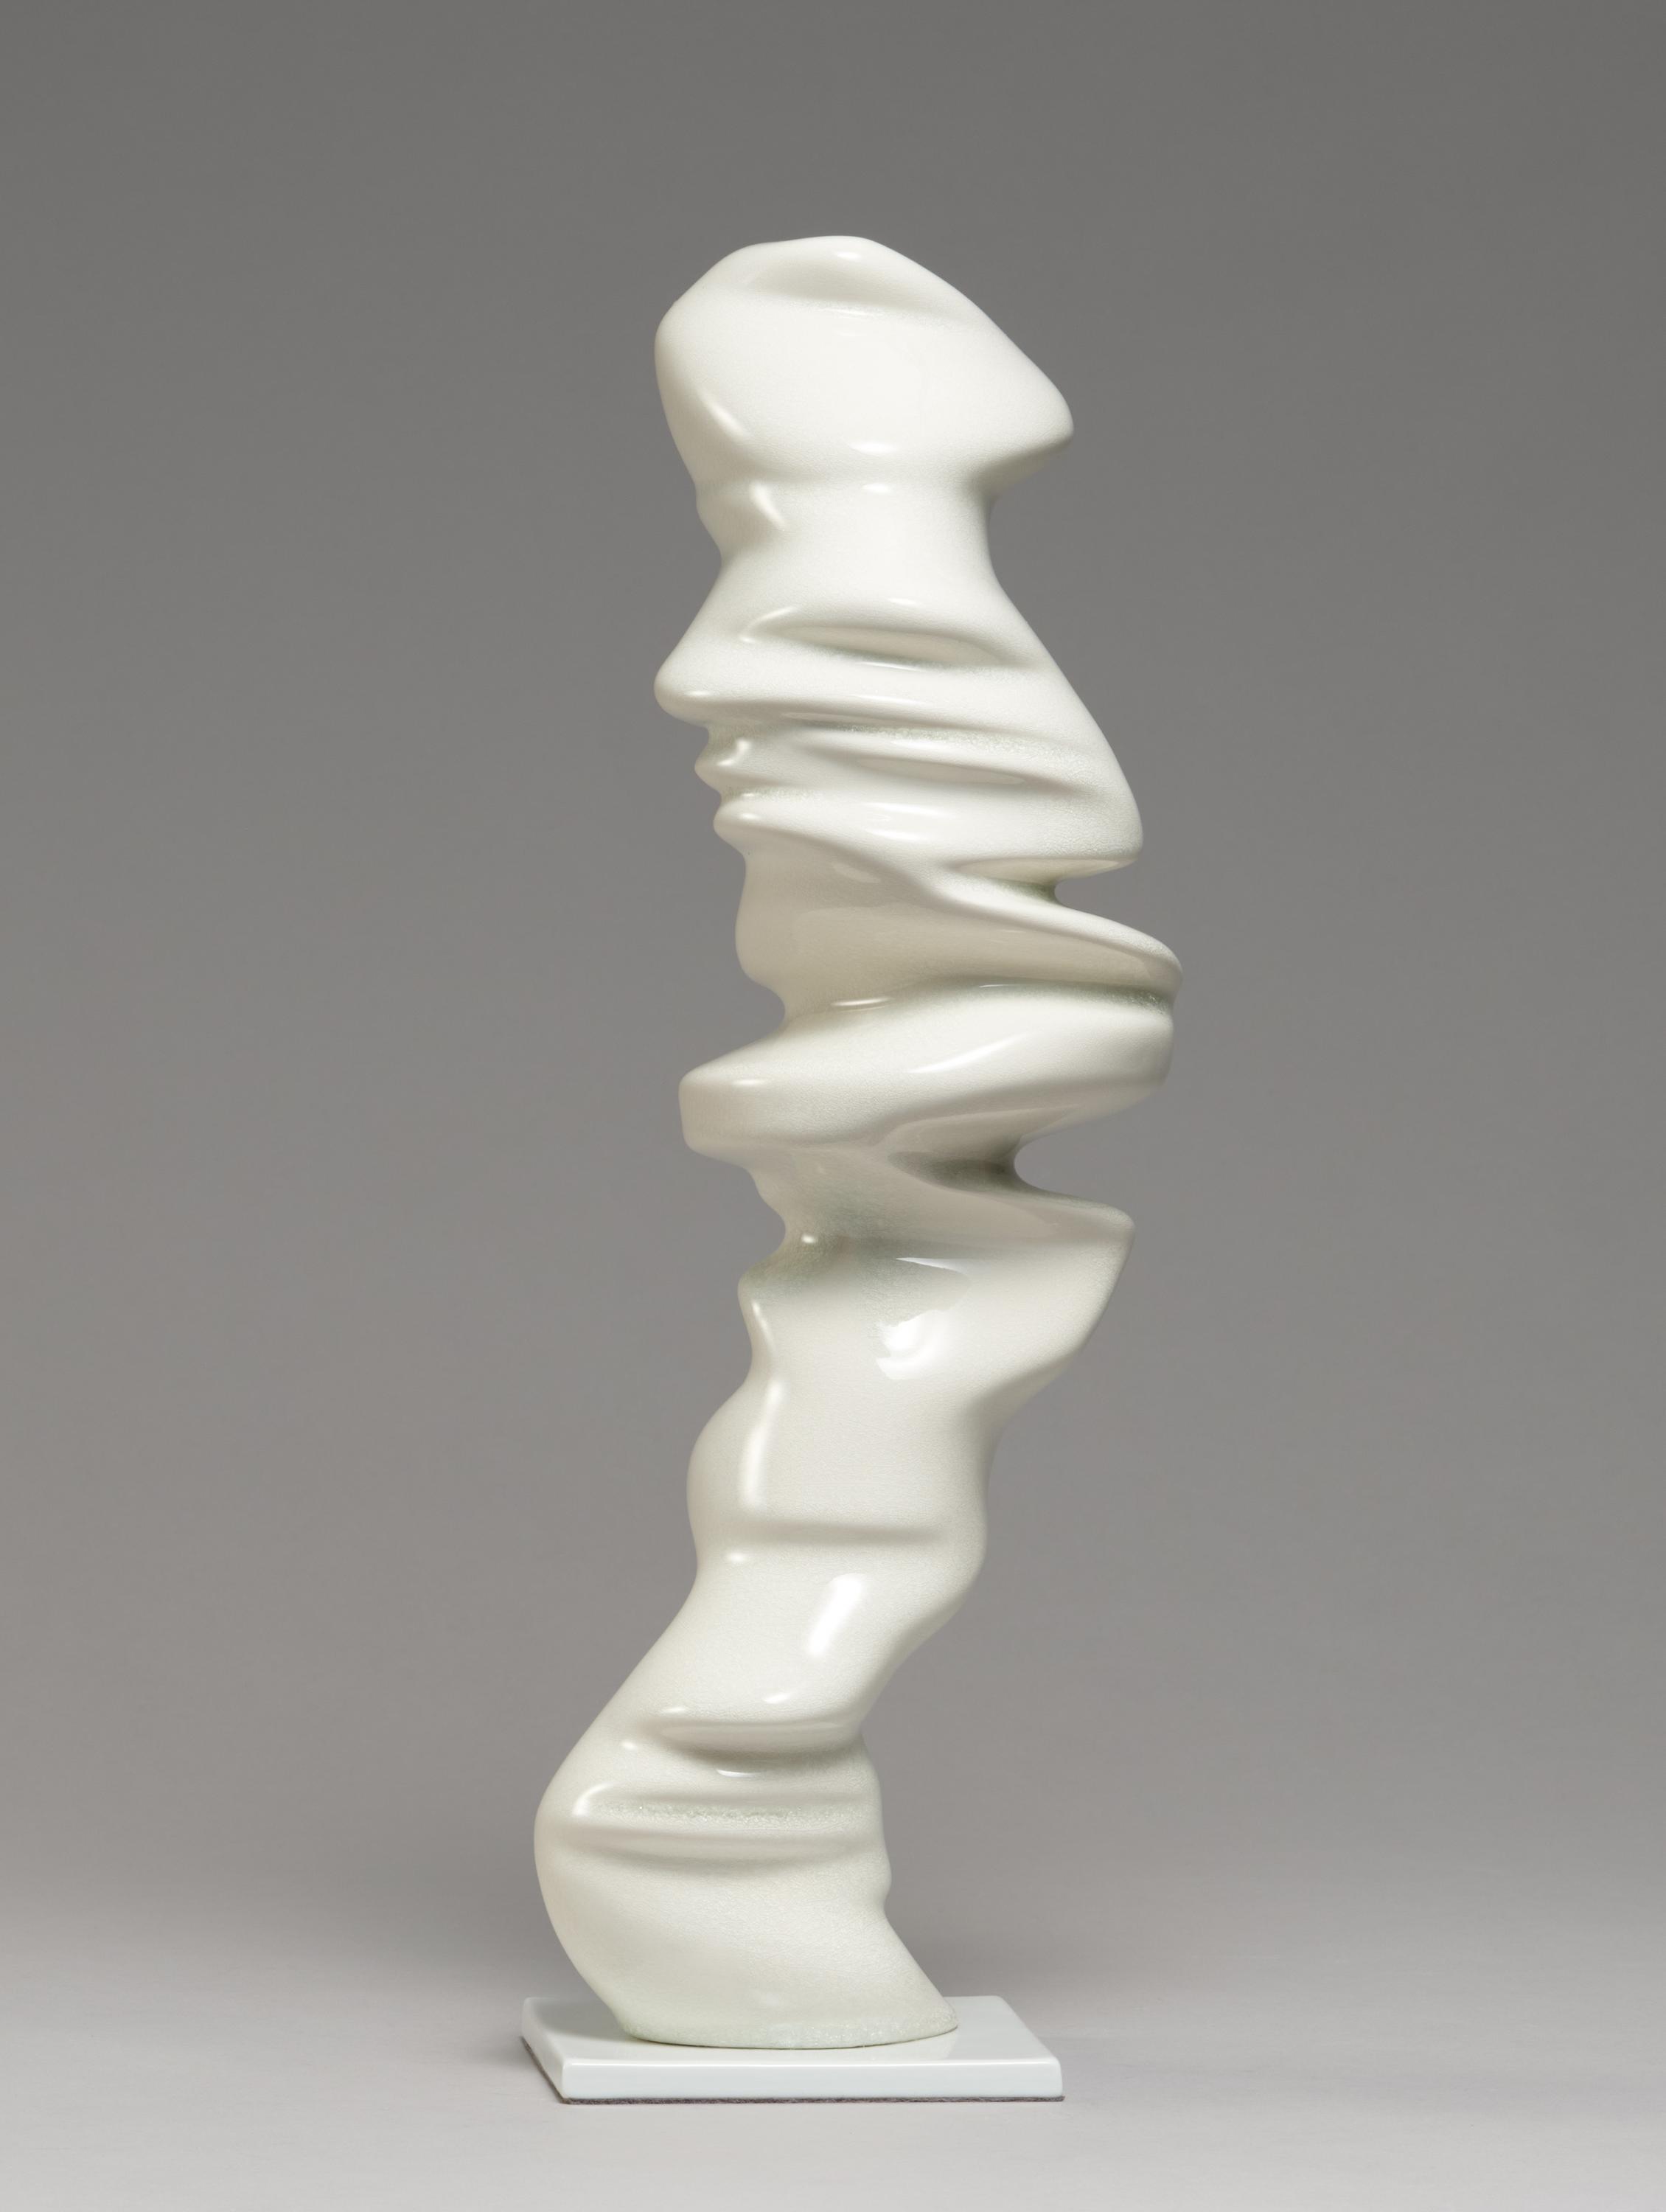 Tony Cragg: Points of View - Image 4 of 4